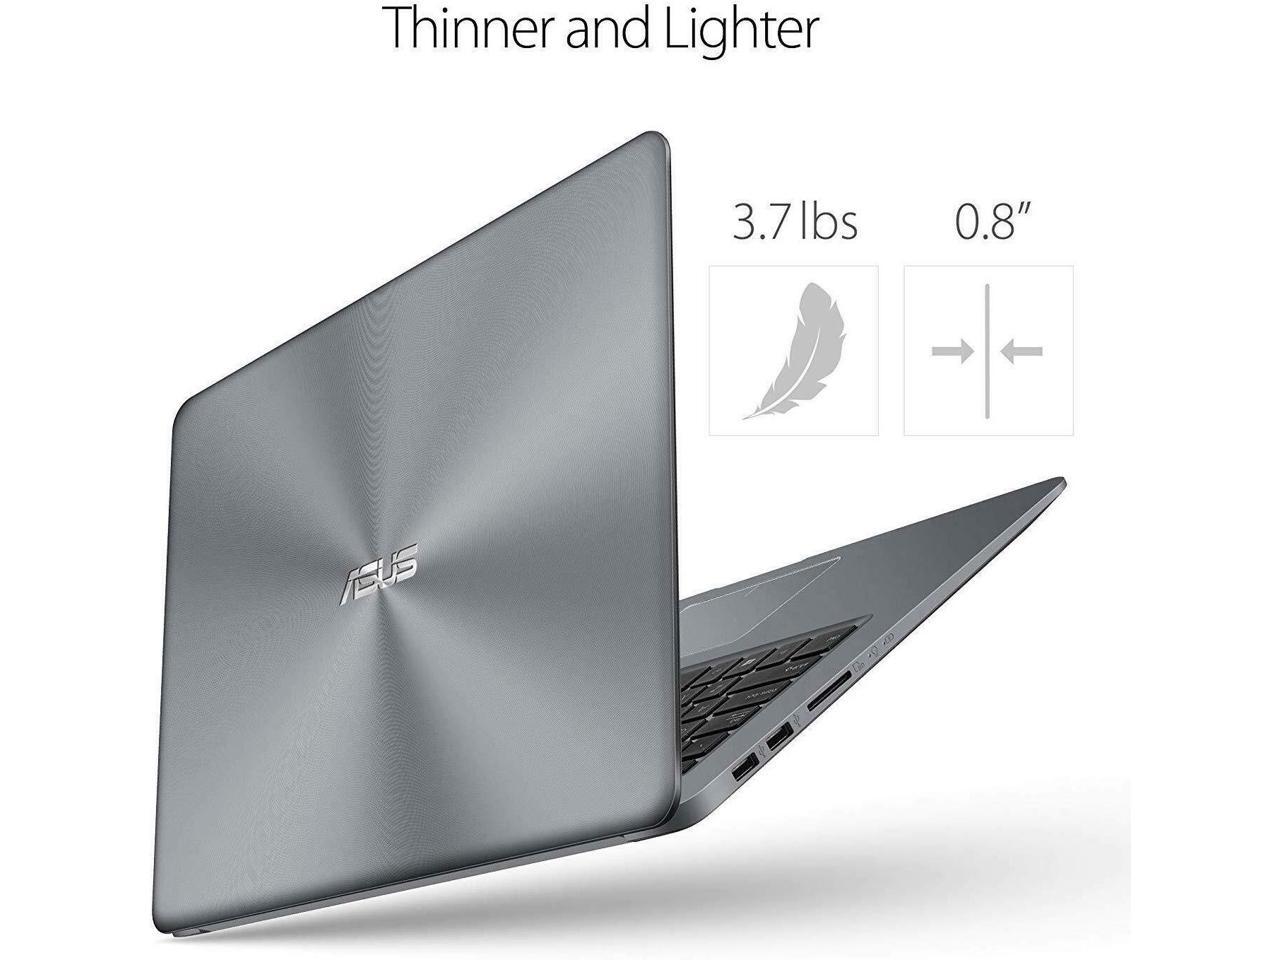 Newest Asus VivoBook Thin & Lightweight Laptop (16G DDR4/512G SSD+1TB HDD)|15.6" Full HD(1920x1080) WideView display| AMD Quad Core A12-9720P Processor| Wi-Fi |Fingerprint Reader|Windows 10 in S Mode